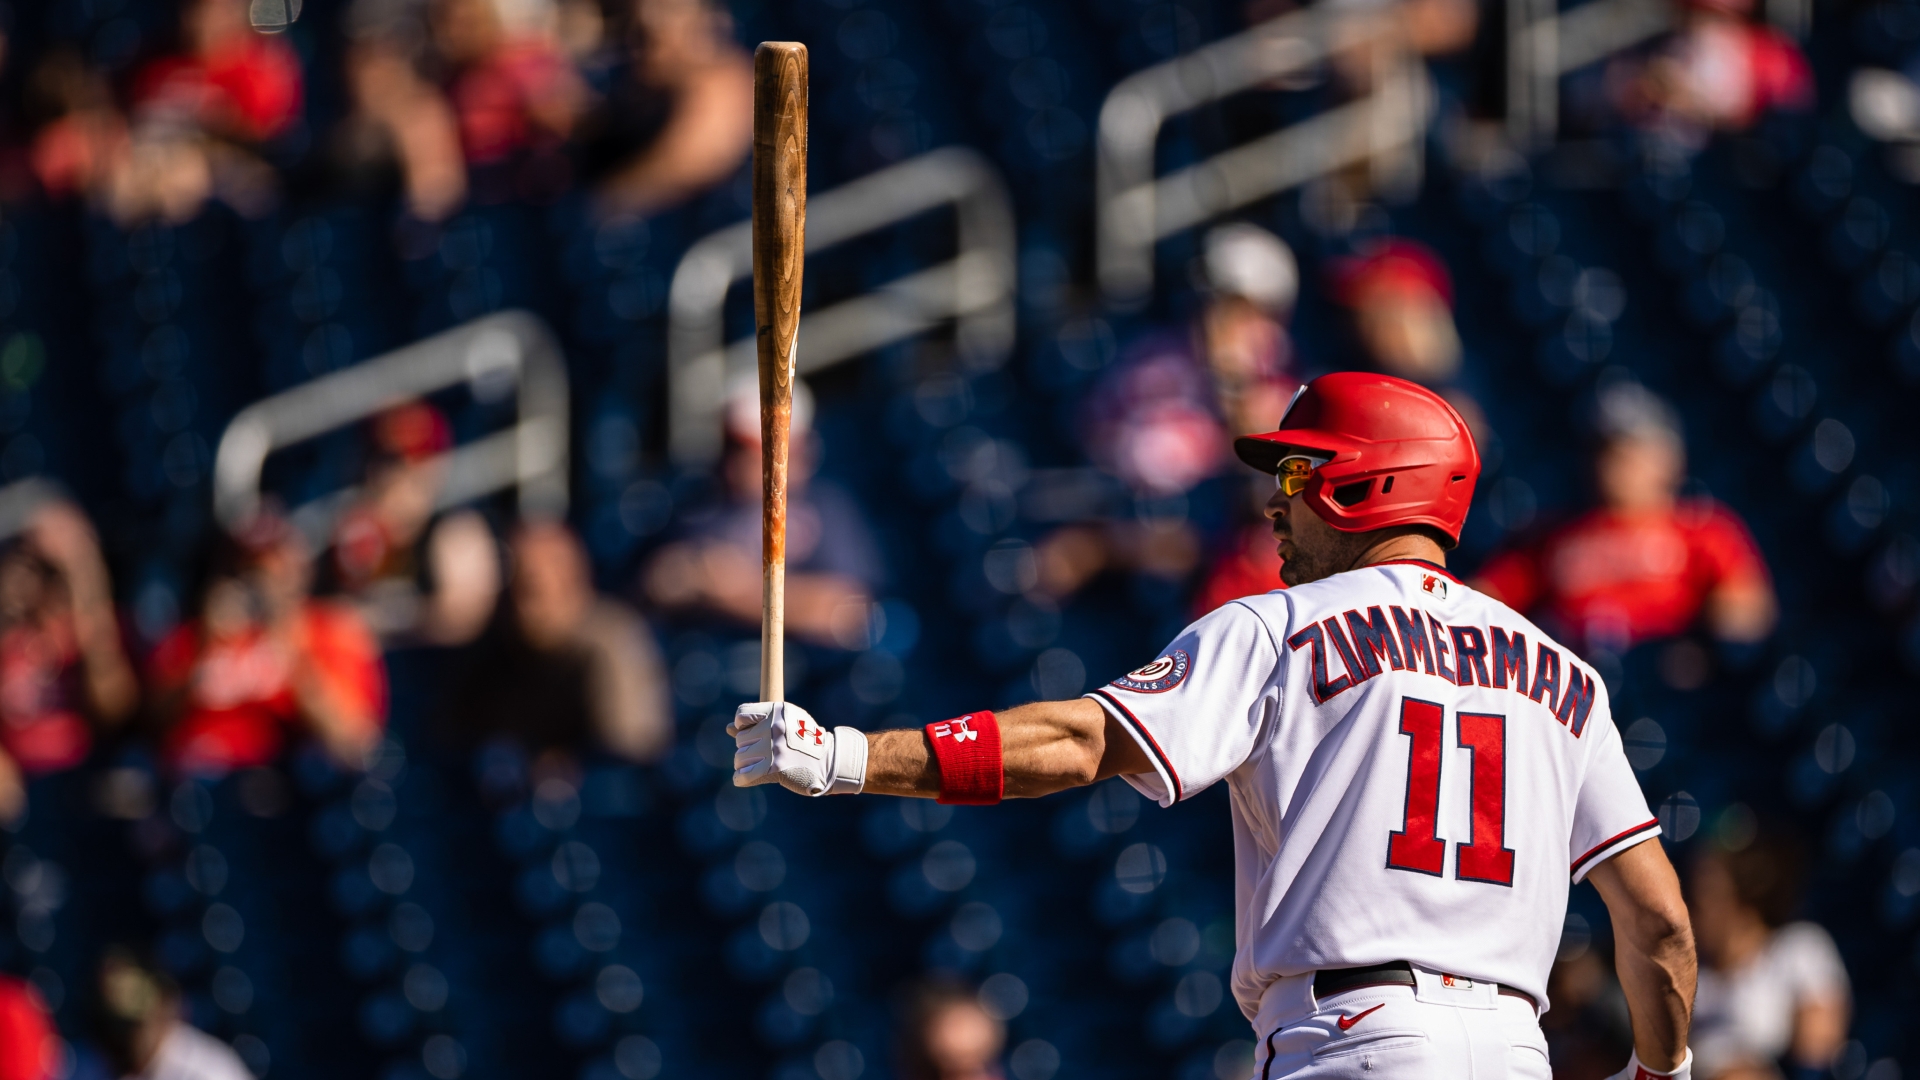 Ryan Zimmerman says physical toll was biggest factor in retirement